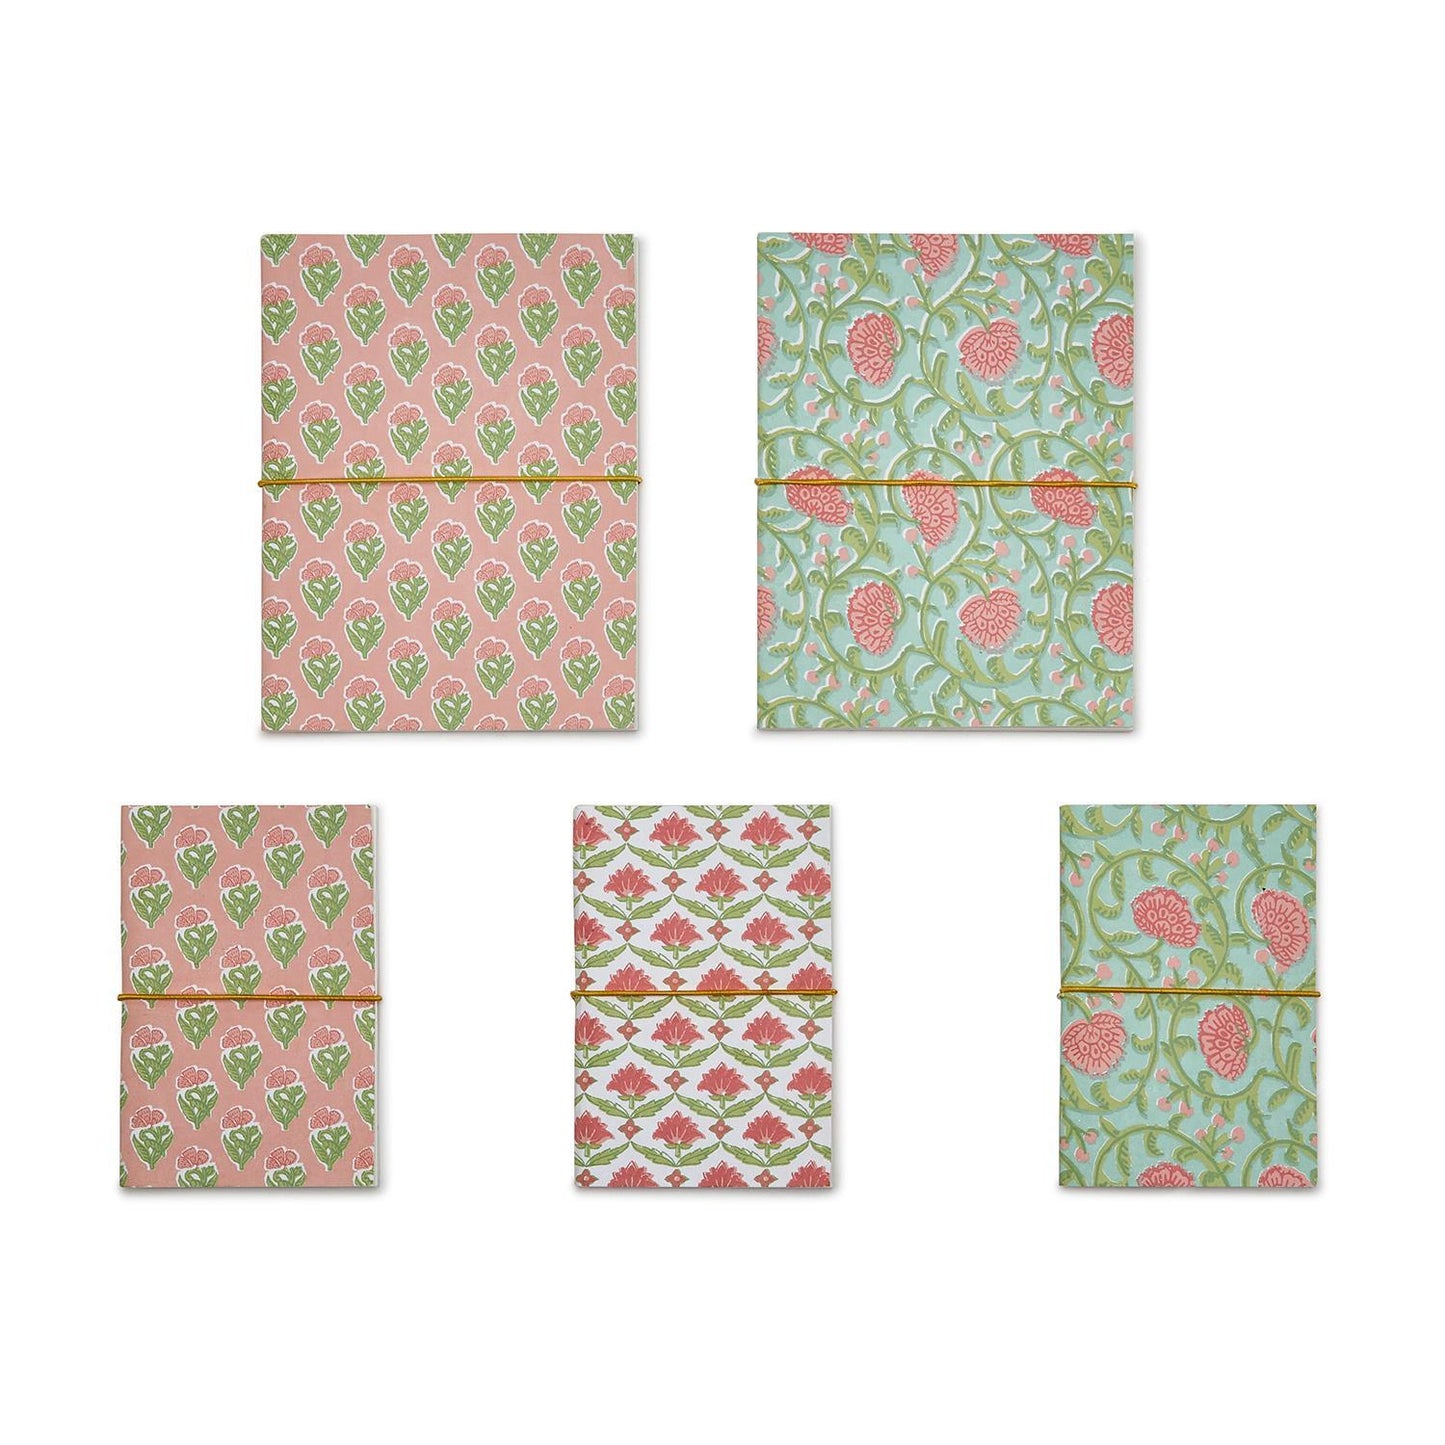 Lg Floral Print Soft Cover Notebooks- Handmade with Recycled Paper